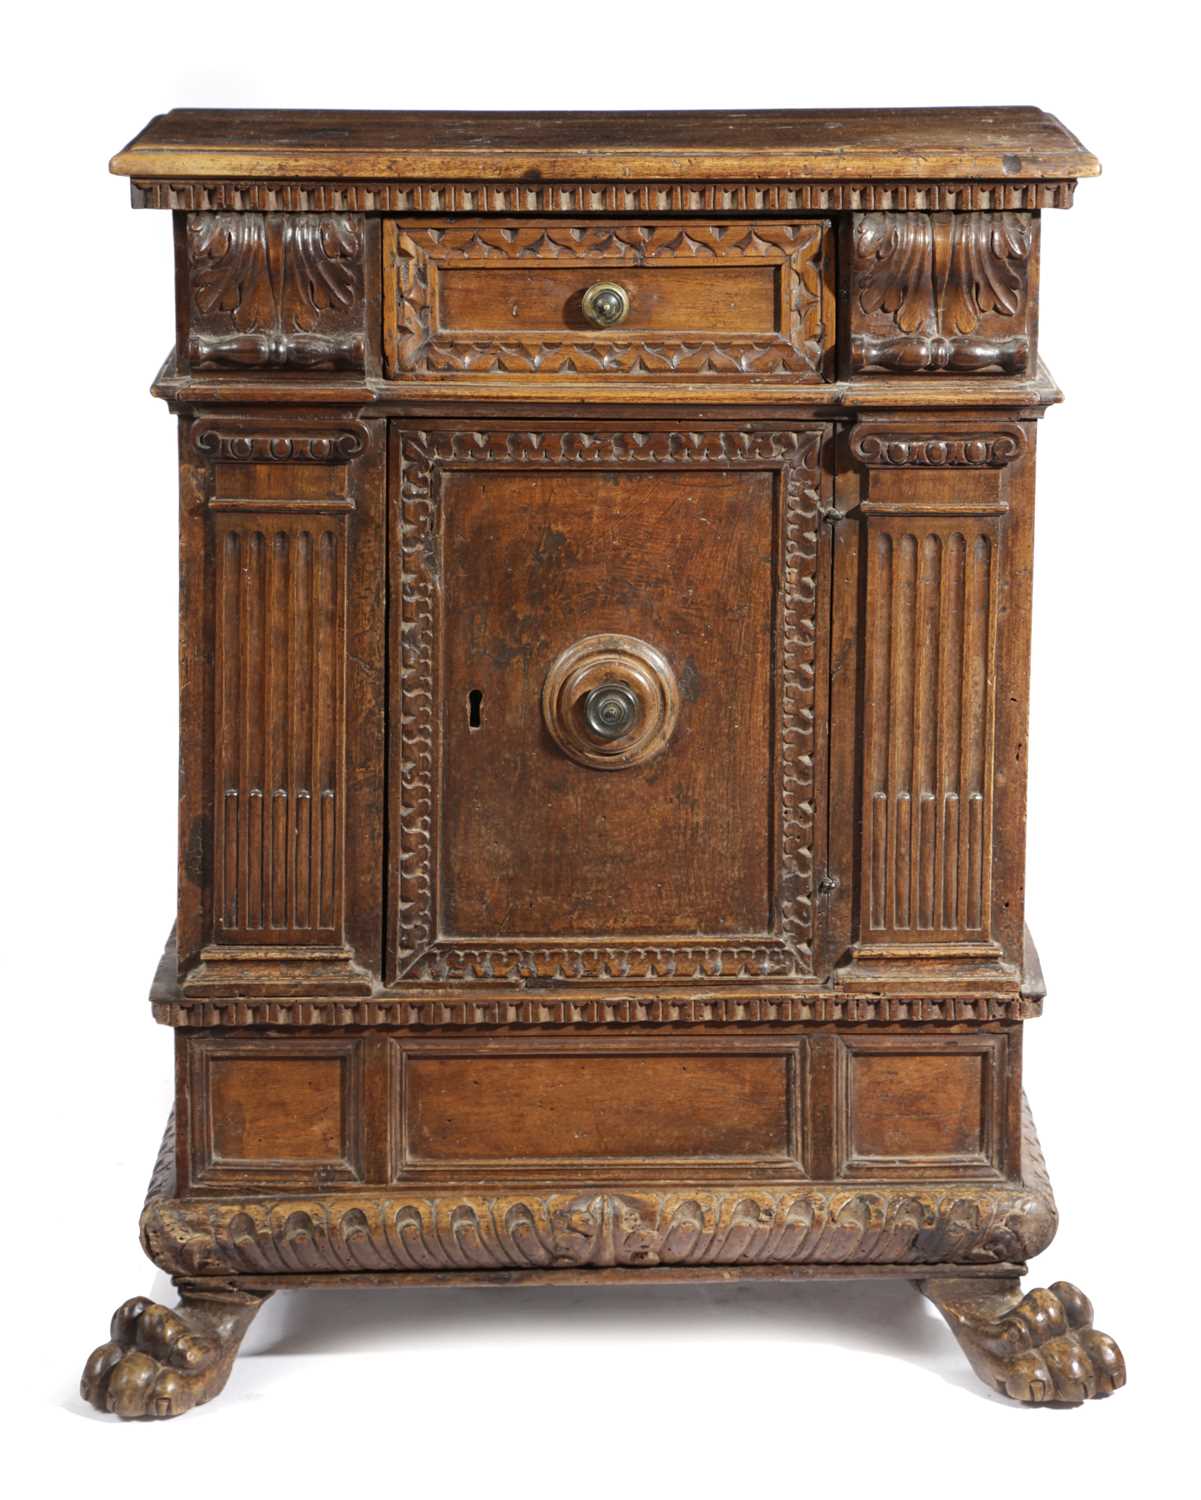 AN ITALIAN WALNUT SIDE CABINET TUSCAN, 17TH CENTURY with a pair of architectural pilasters